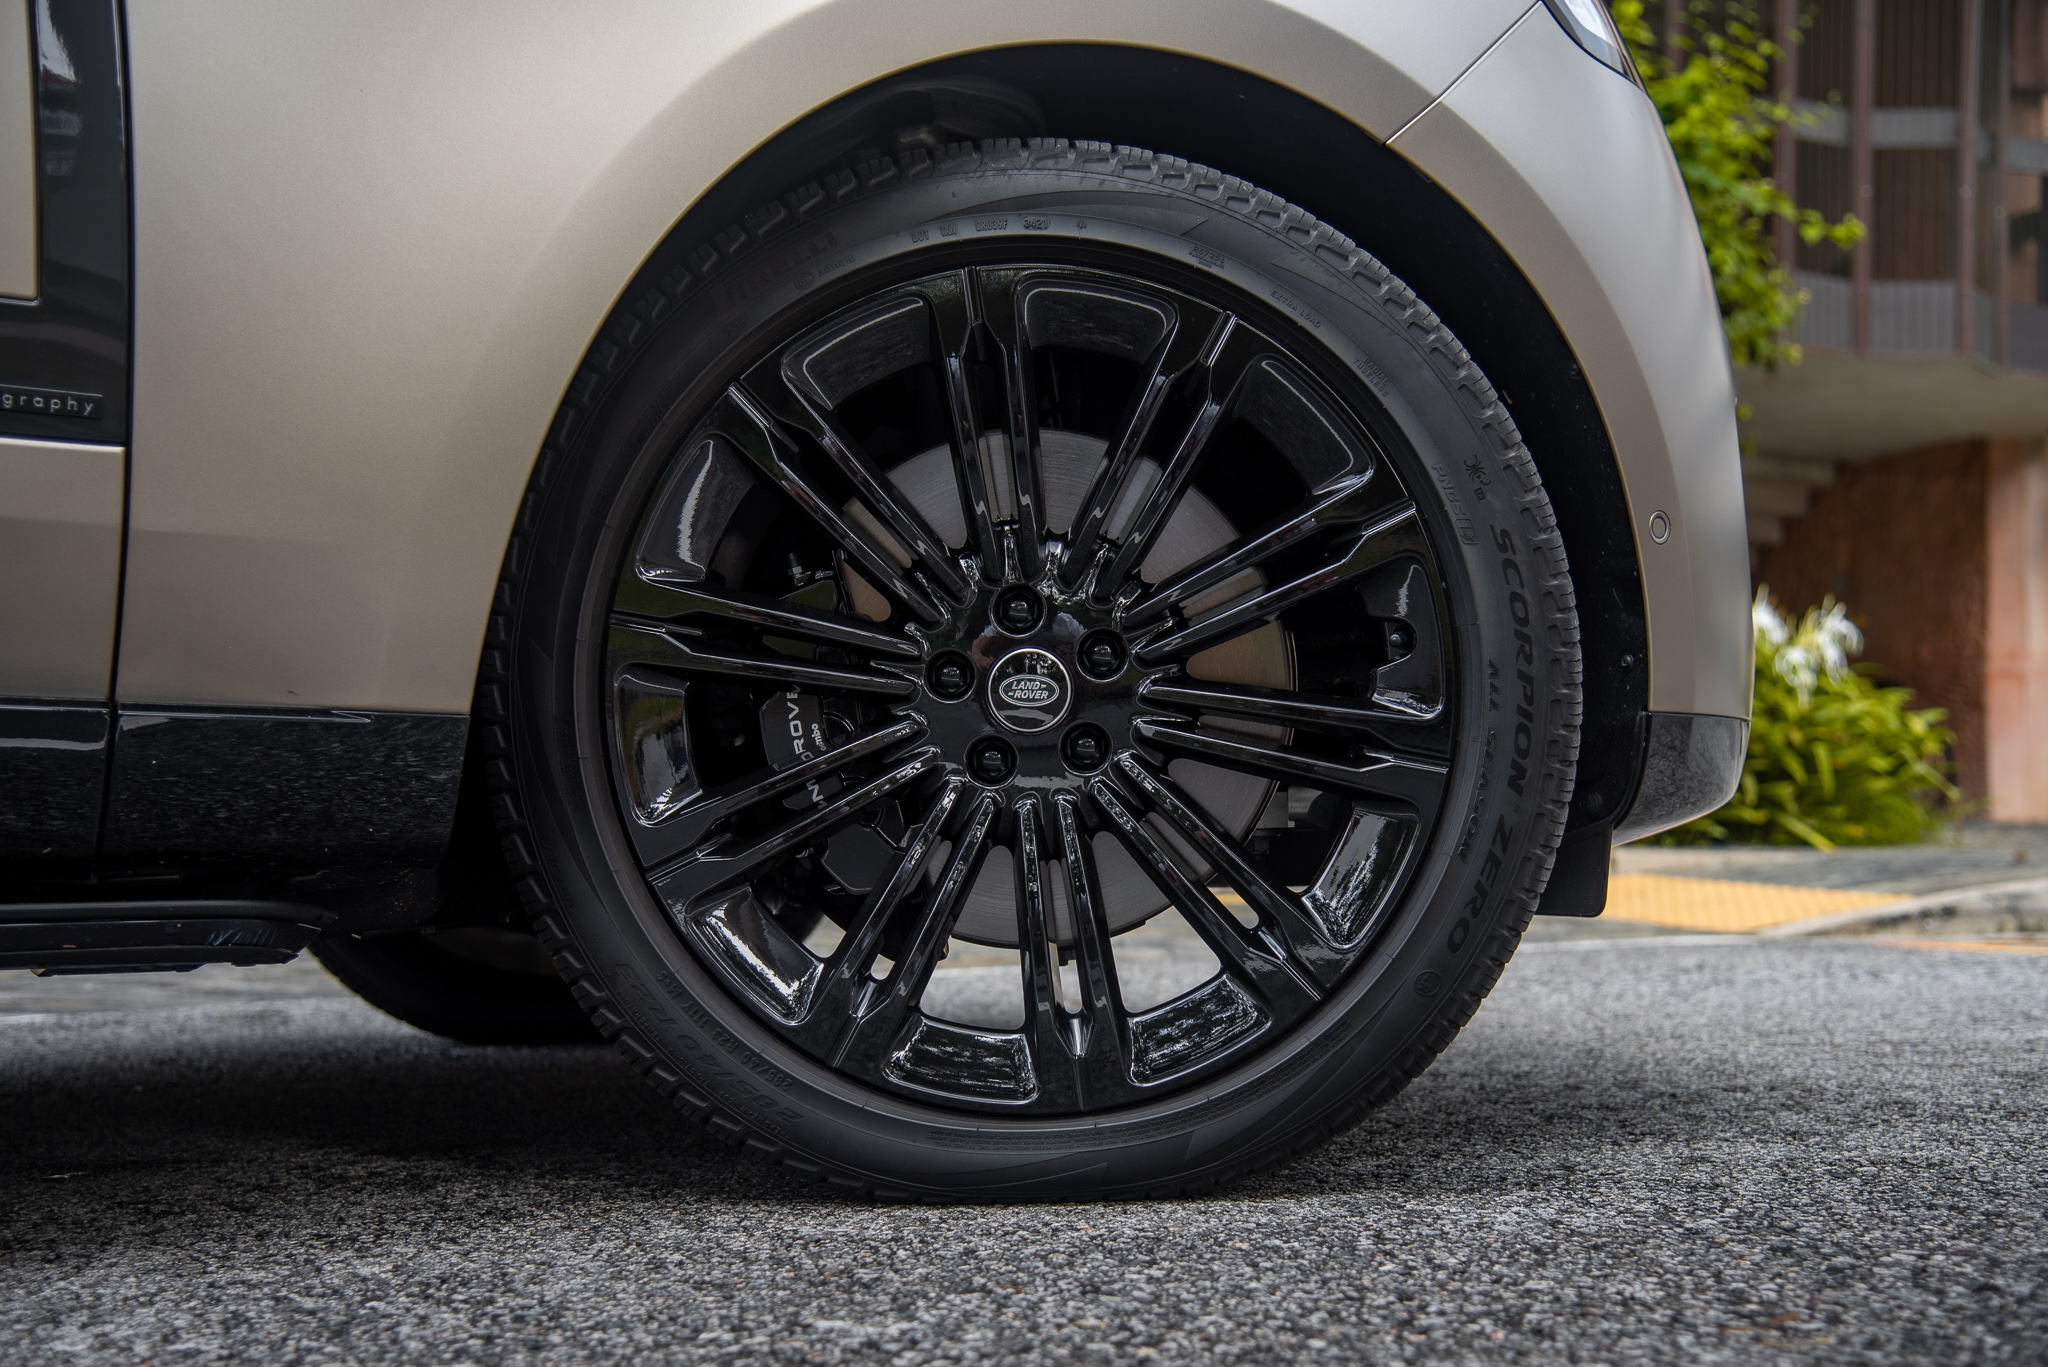 Gorgeous 23-inch Style 1075 alloy rims in Gloss Dark Grey Contrast with Diamond Turned finish